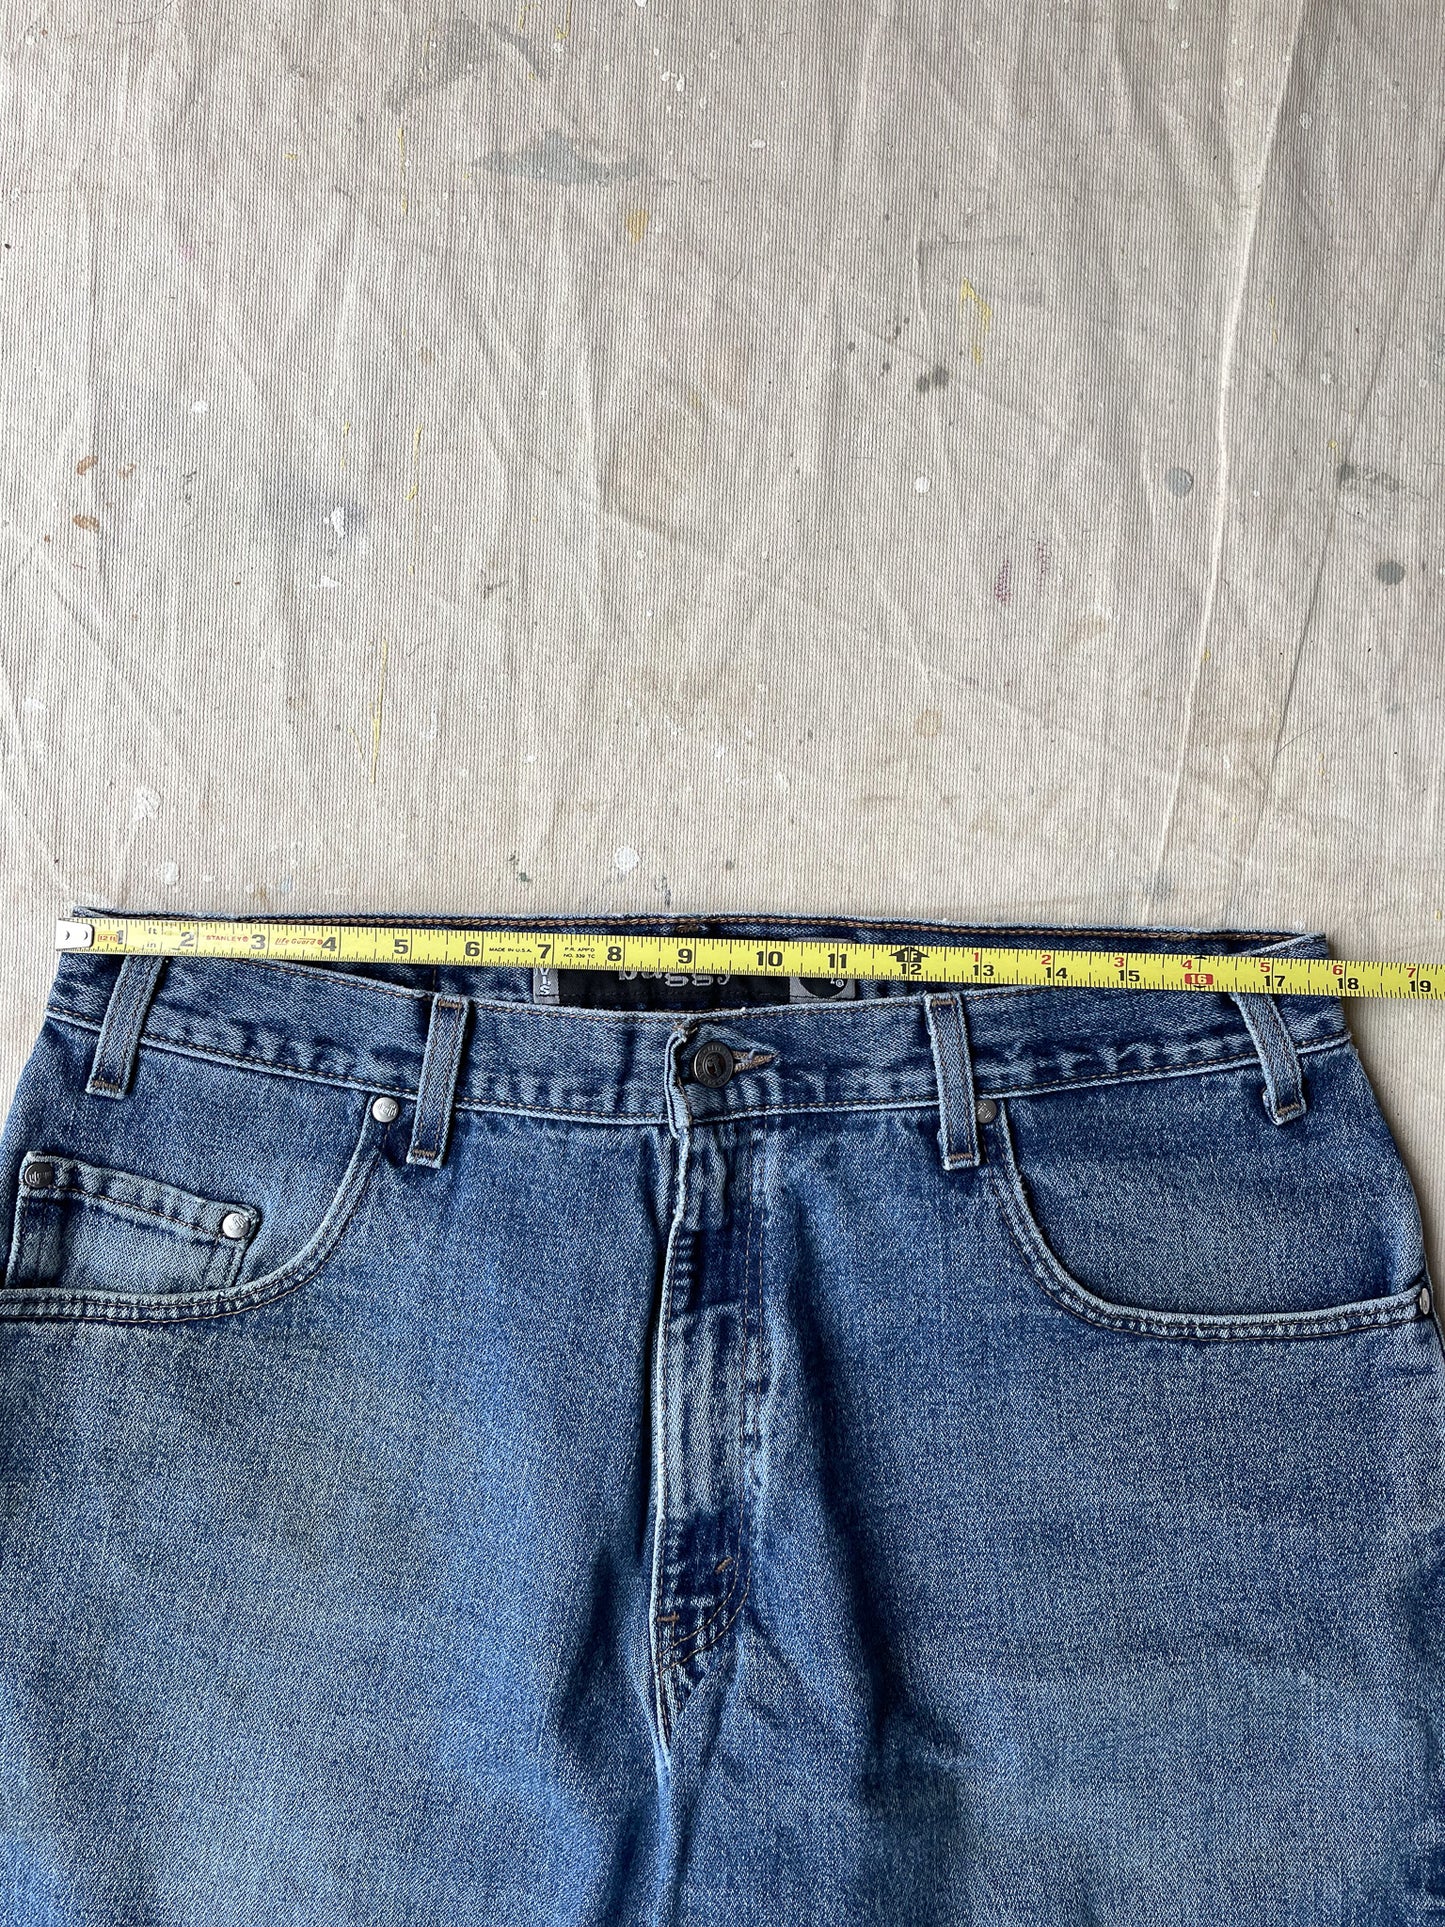 90's Levi's Silvertab Ripped Baggy Jeans—[36X32]